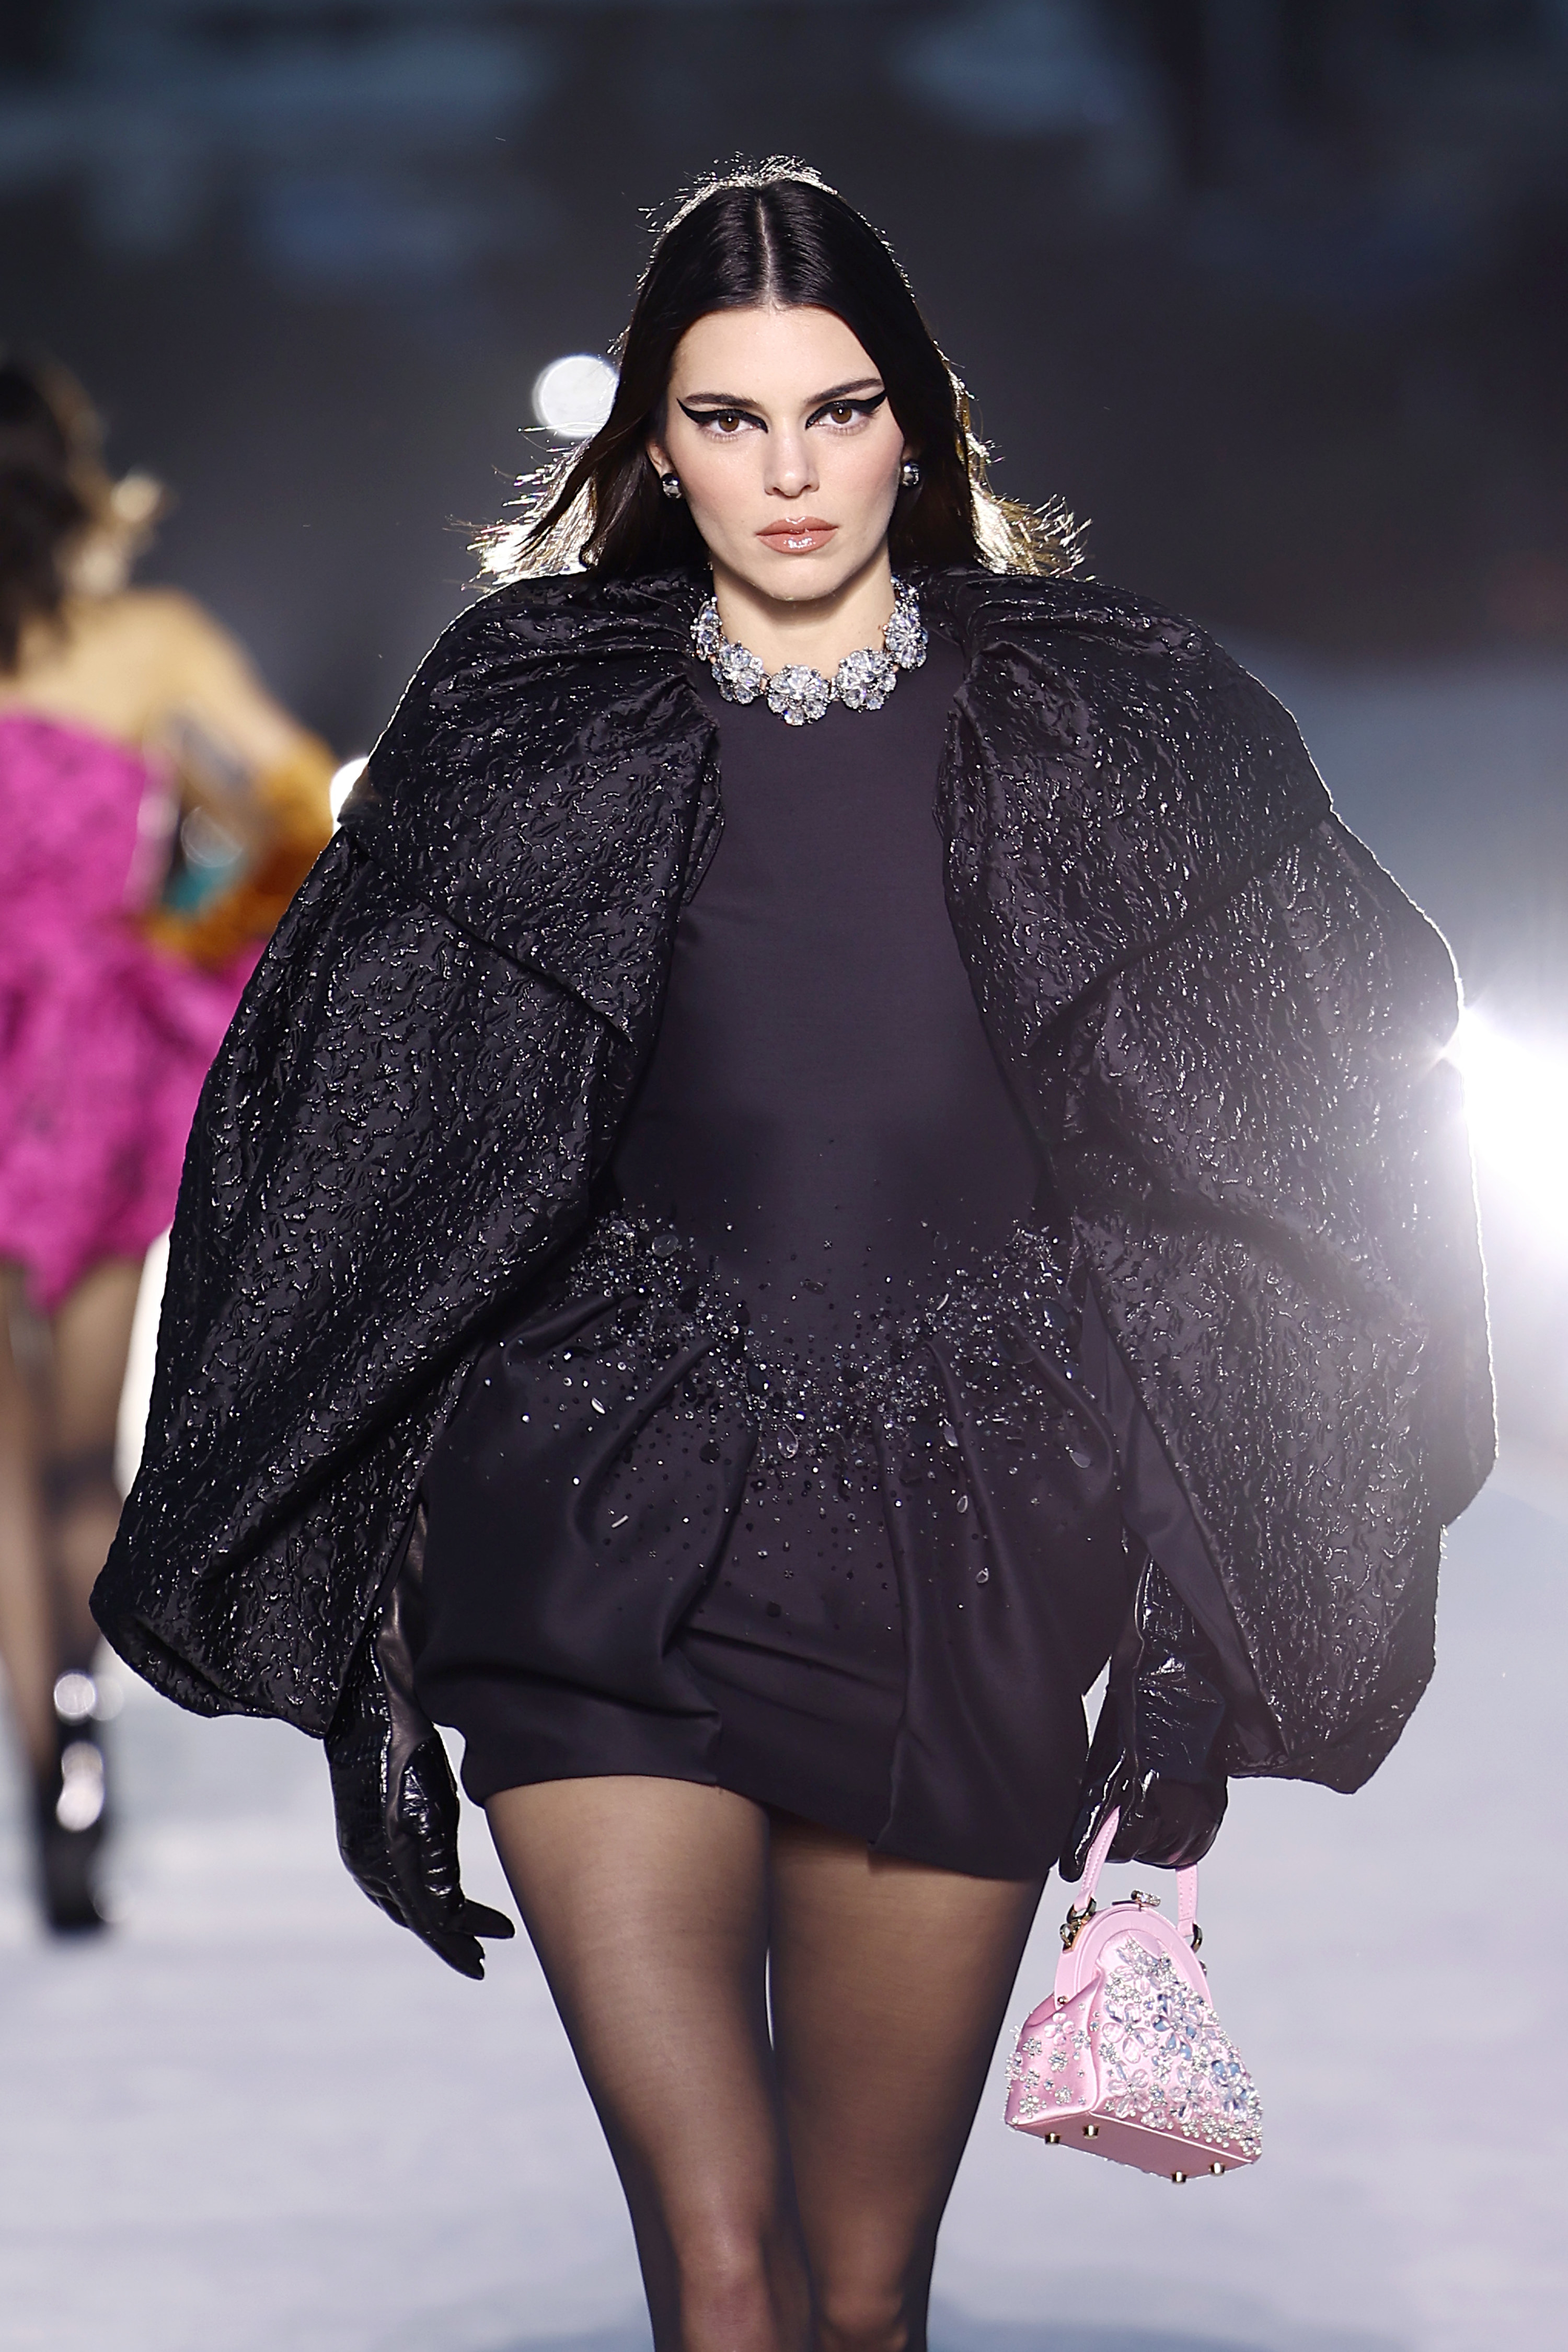 kendall on the runway